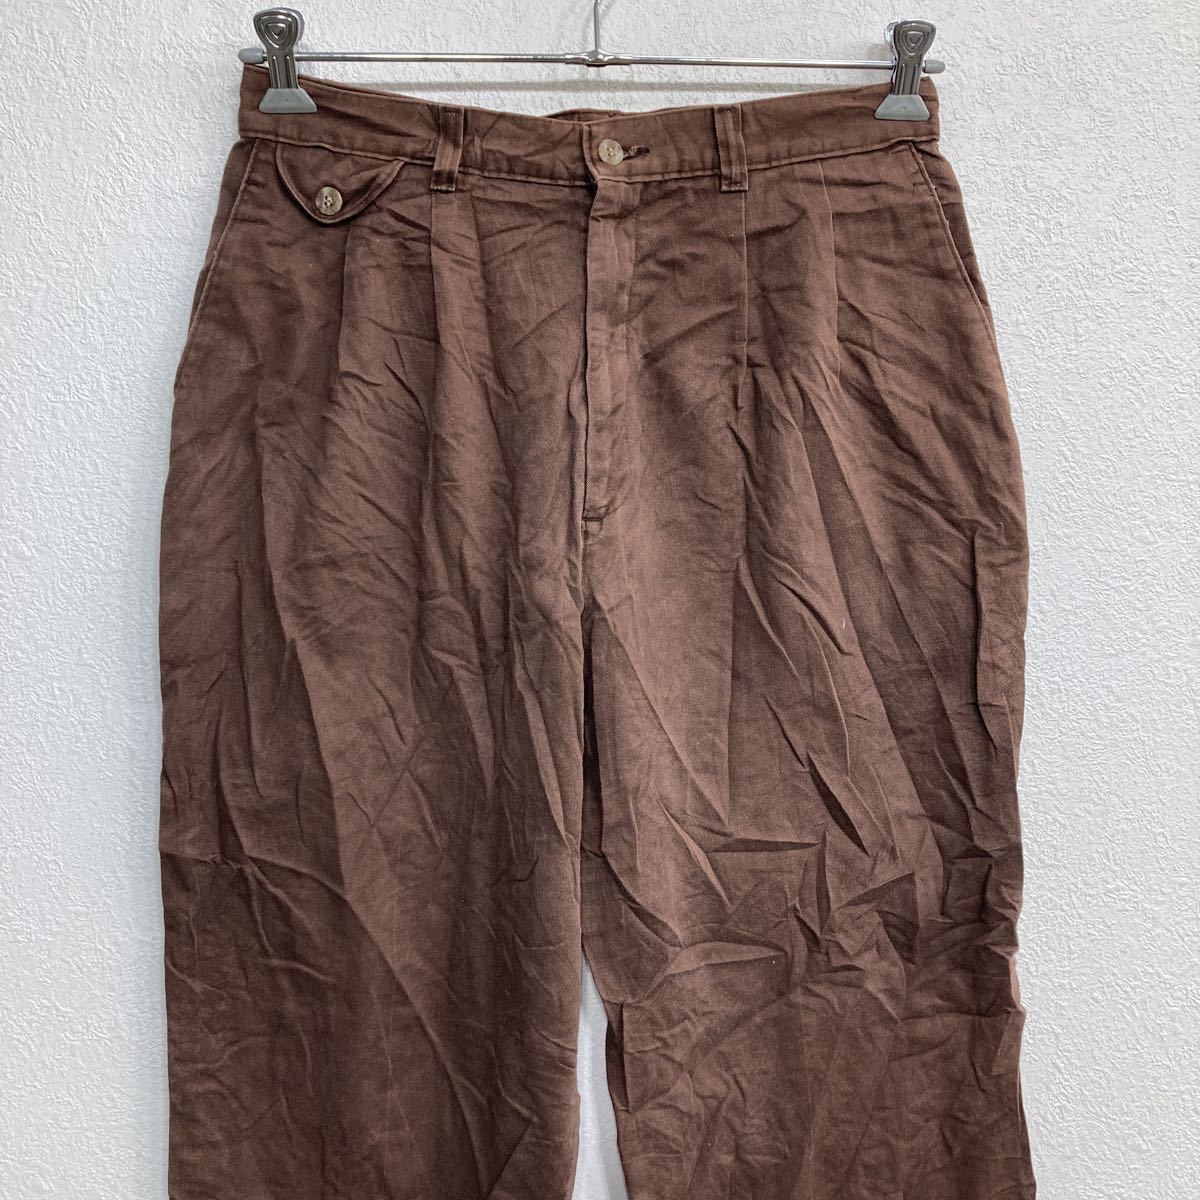 Lee chinos W31 Lee lady's tuck pants Brown old clothes . America buying up 2302-13